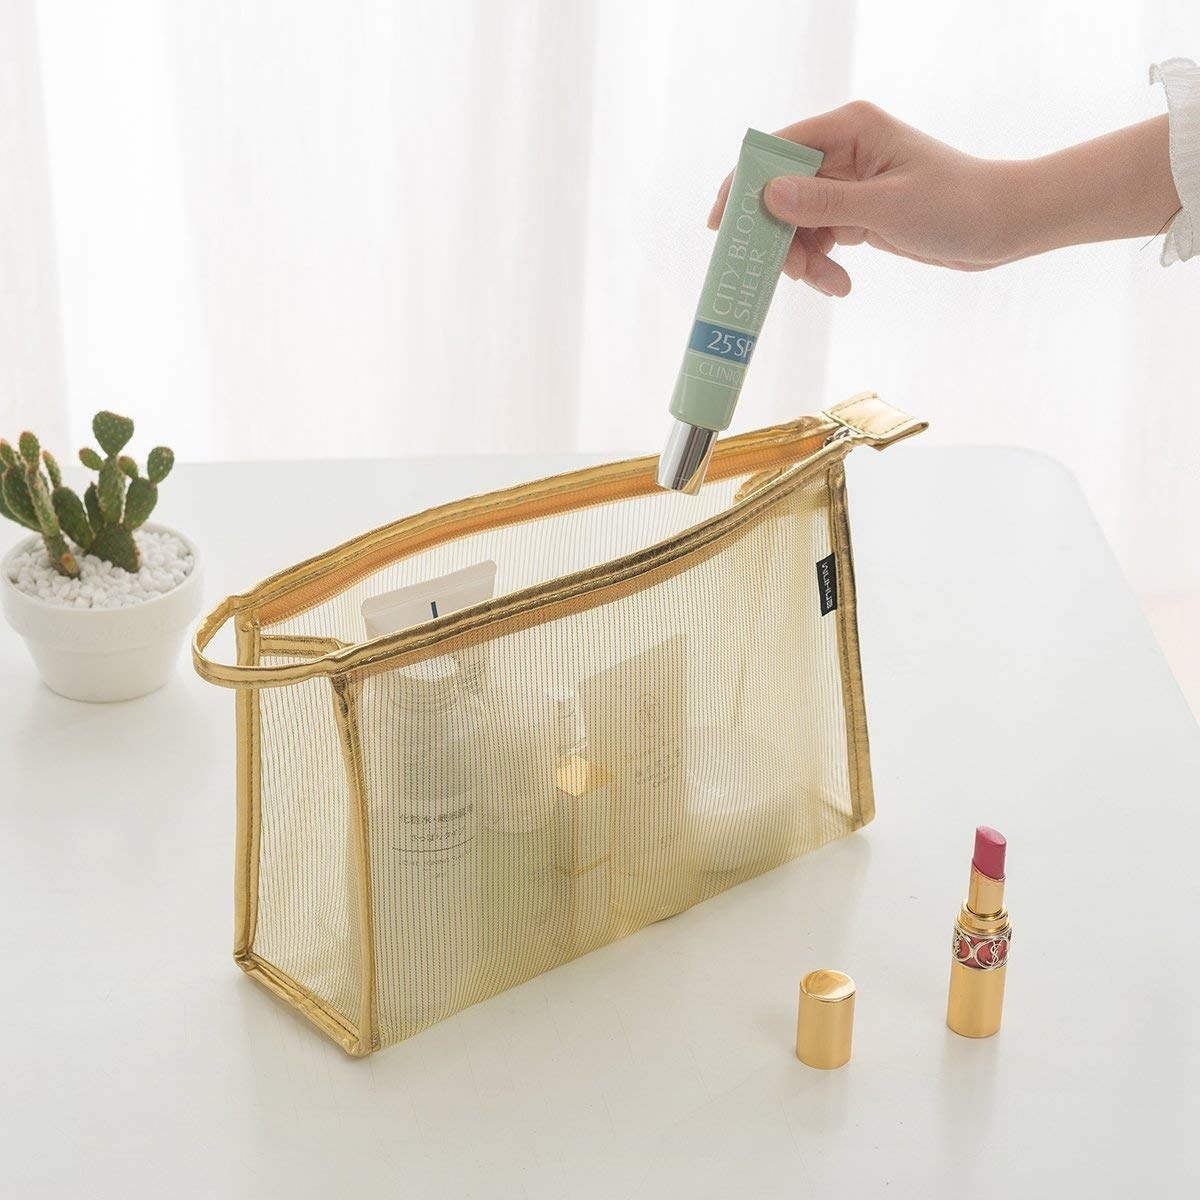 No more messy bag!' This clever, bestselling purse organizer just dropped  to $10